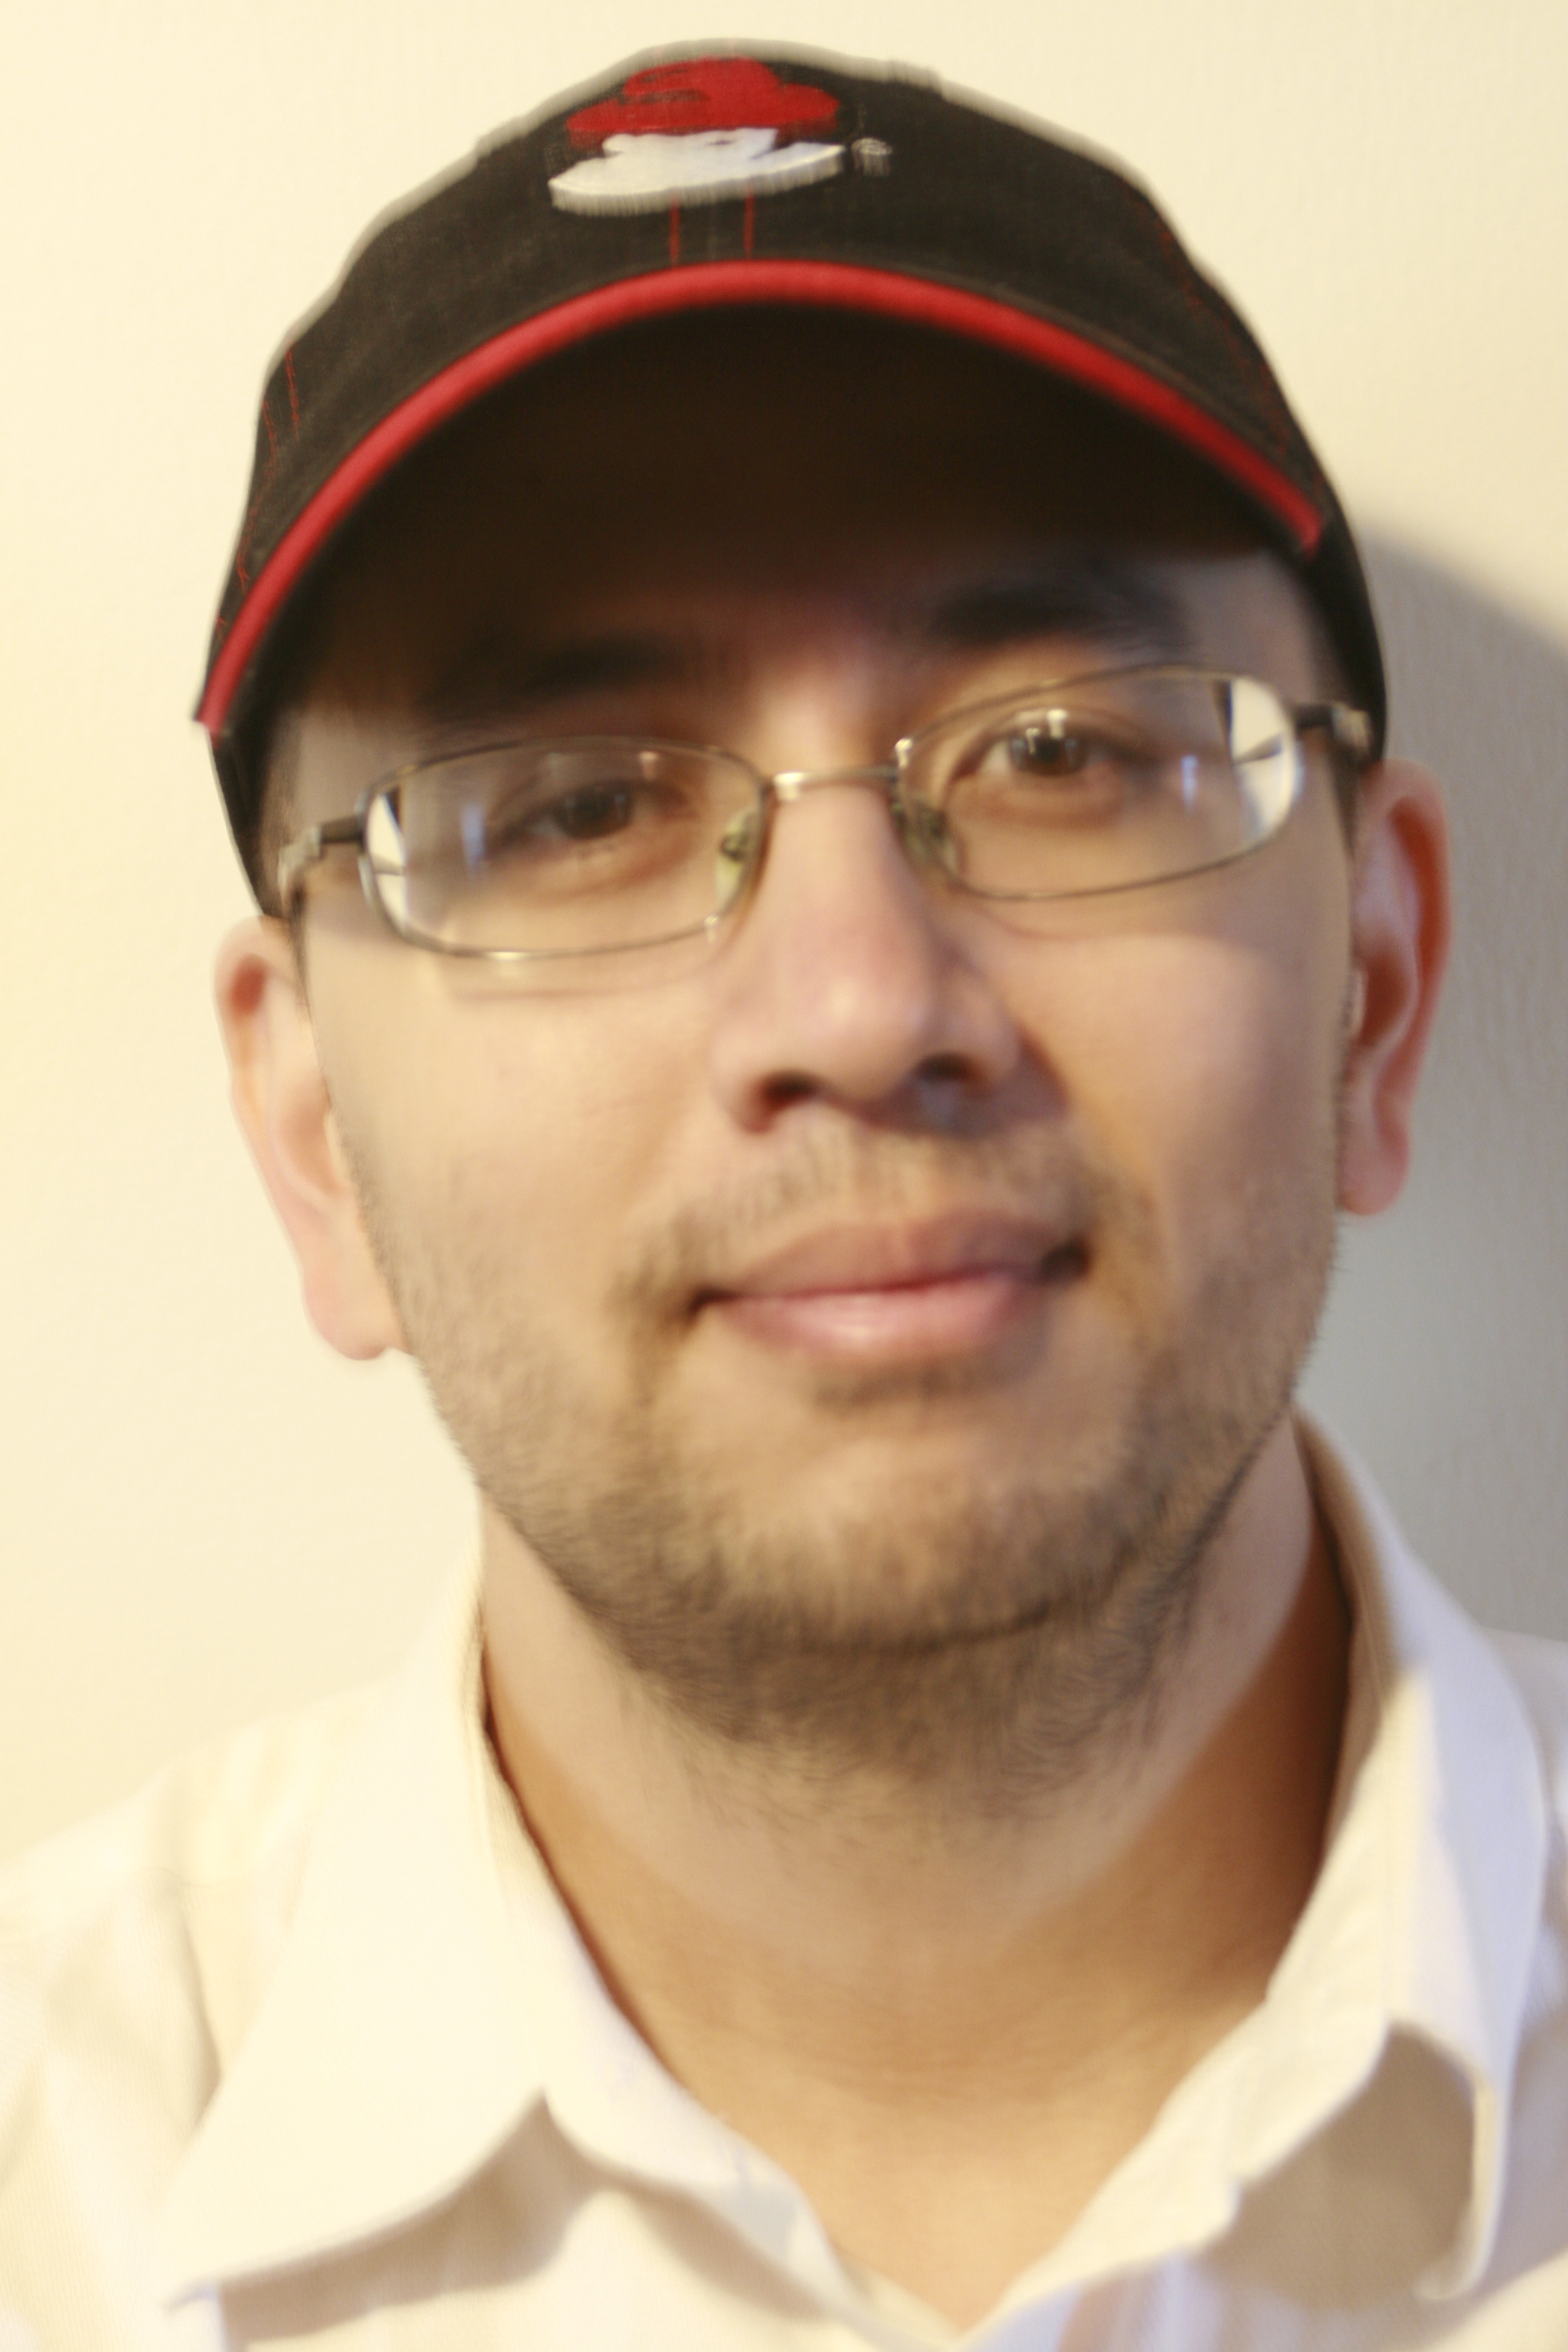 Decently lit picture of Colin's face, wearing a black-and-red Redhat hat